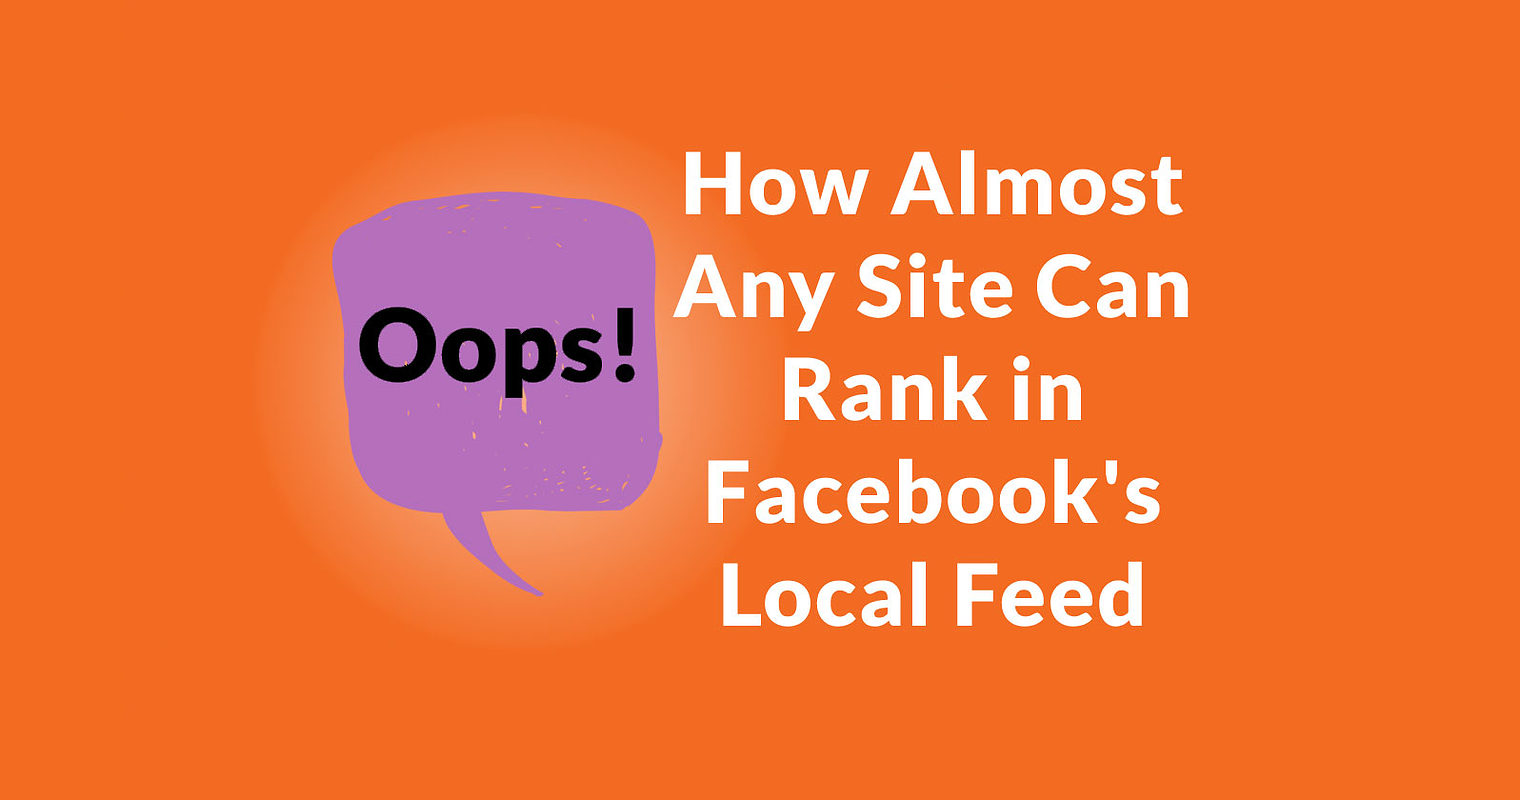 Facebook’s Local Feed Update – Not Just for News Sites!